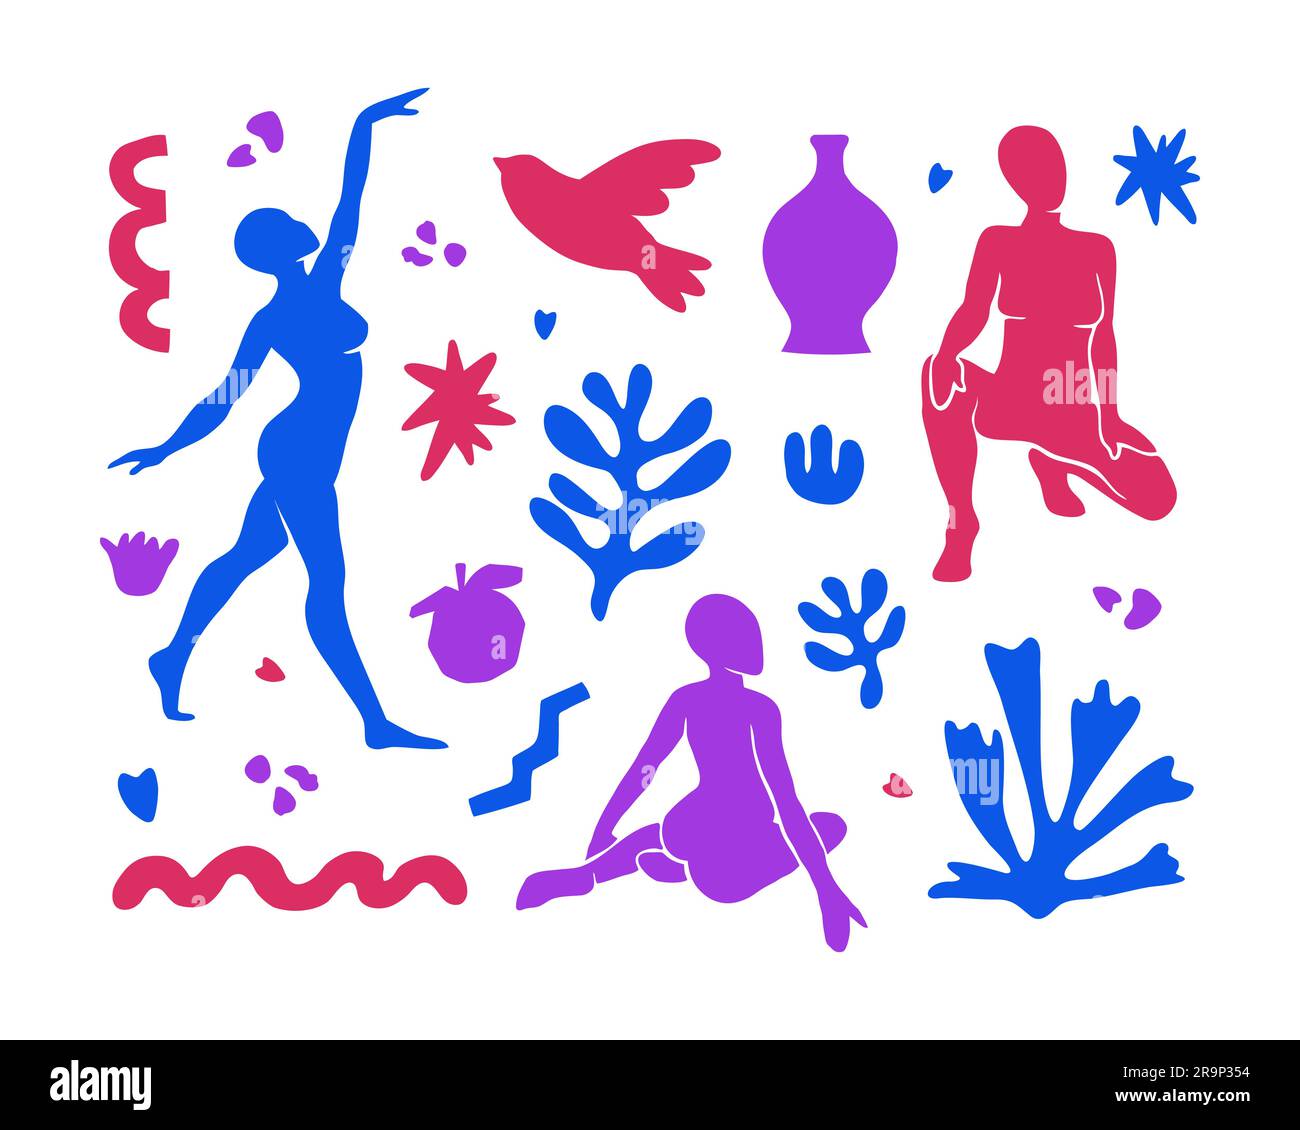 Vector set with trendy aesthetic elements inspired by modern minimal Matisse cut out style. Geometric shapes, flowers, plants, female figures for prin Stock Vector